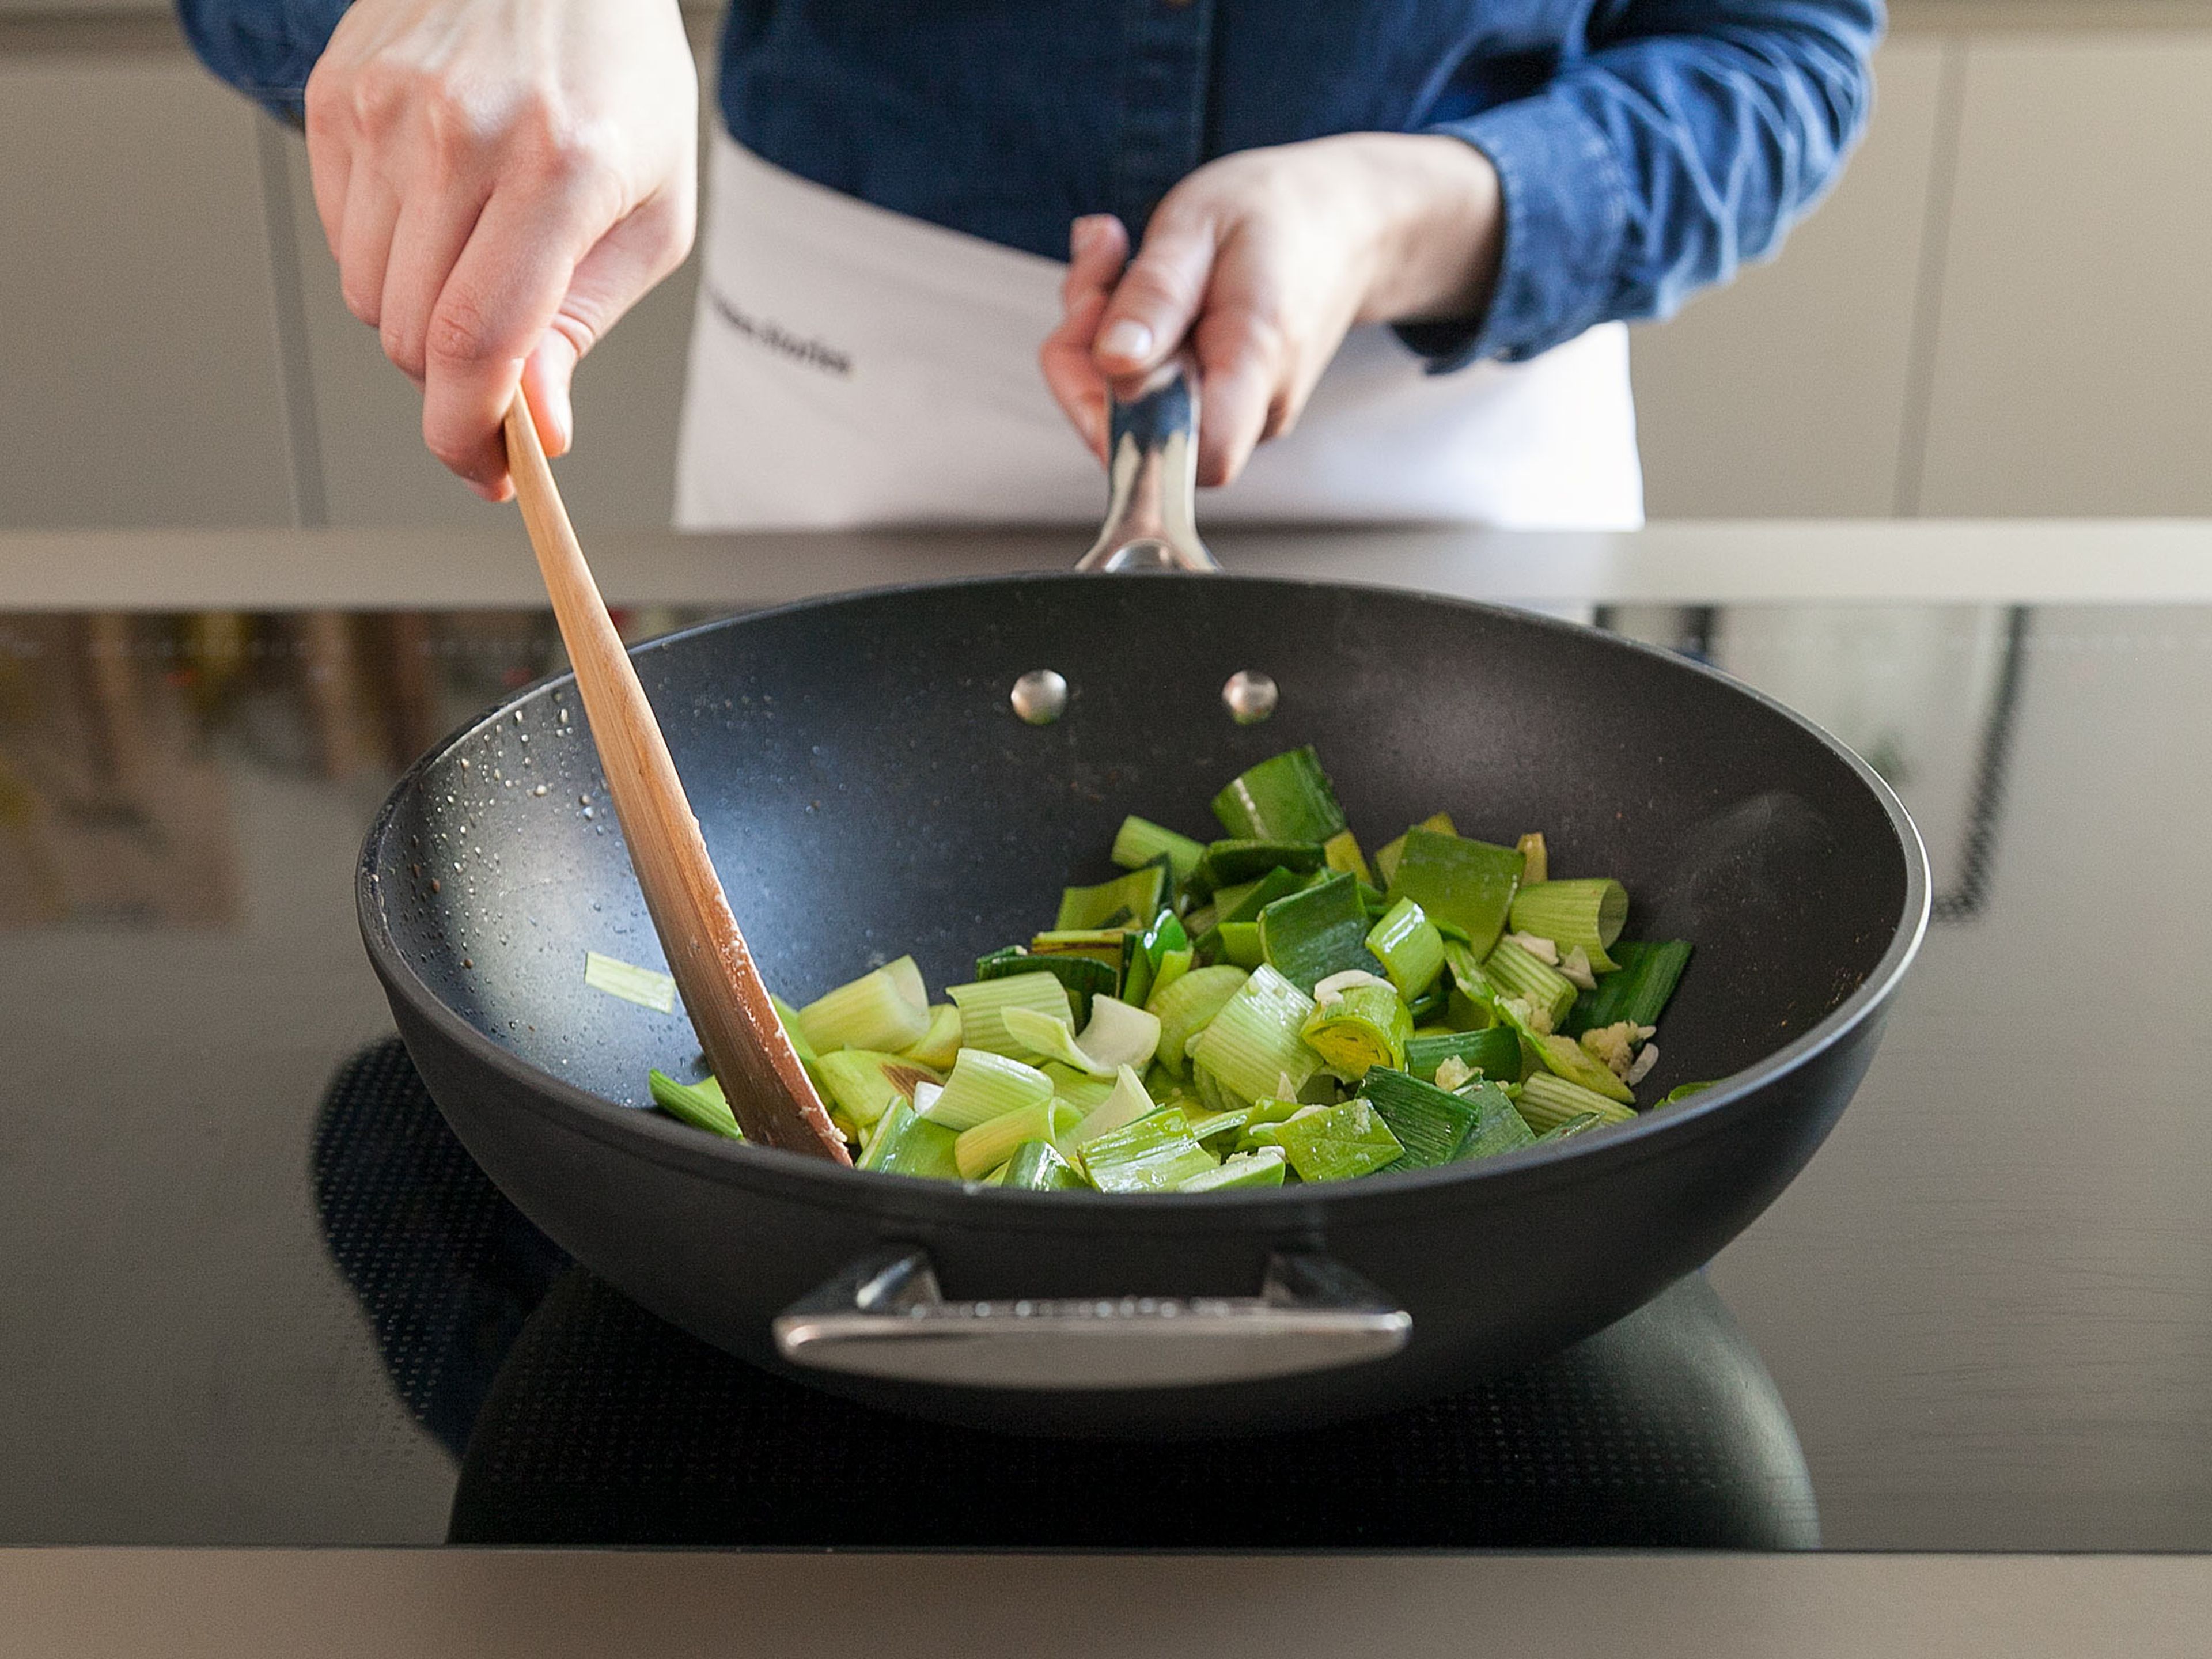 Heat remaining oil in same wok and swirl to coat. Add sliced leeks and stir-fry for approx. 3 min., or until almost tender. Add minced garlic and ginger and fry for approx. 30 sec., or until fragrant. Add pork back to wok.